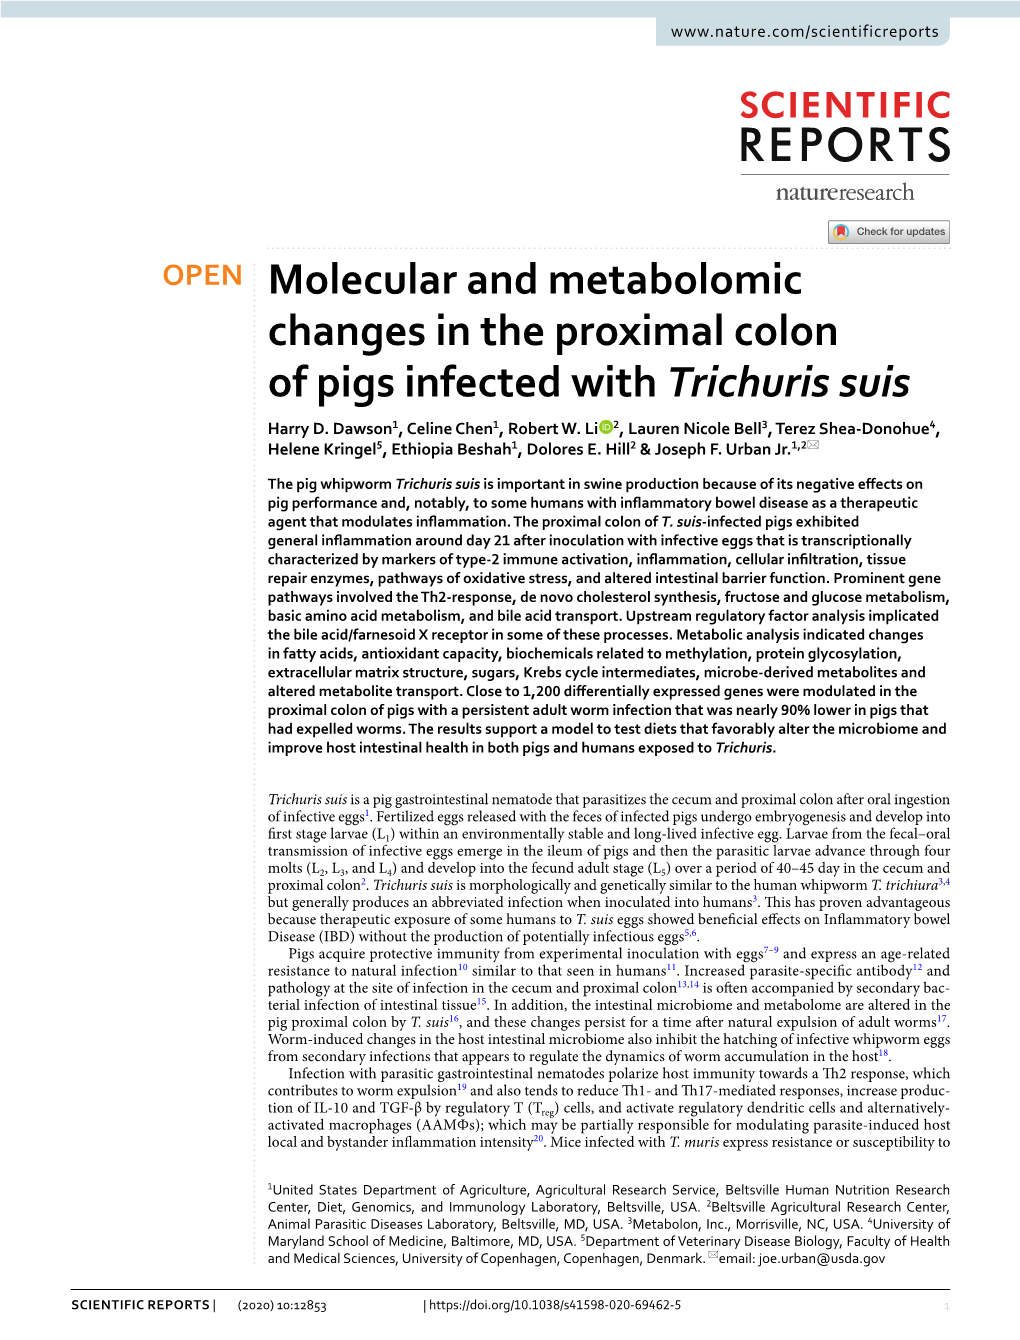 Molecular and Metabolomic Changes in the Proximal Colon of Pigs Infected with Trichuris Suis Harry D